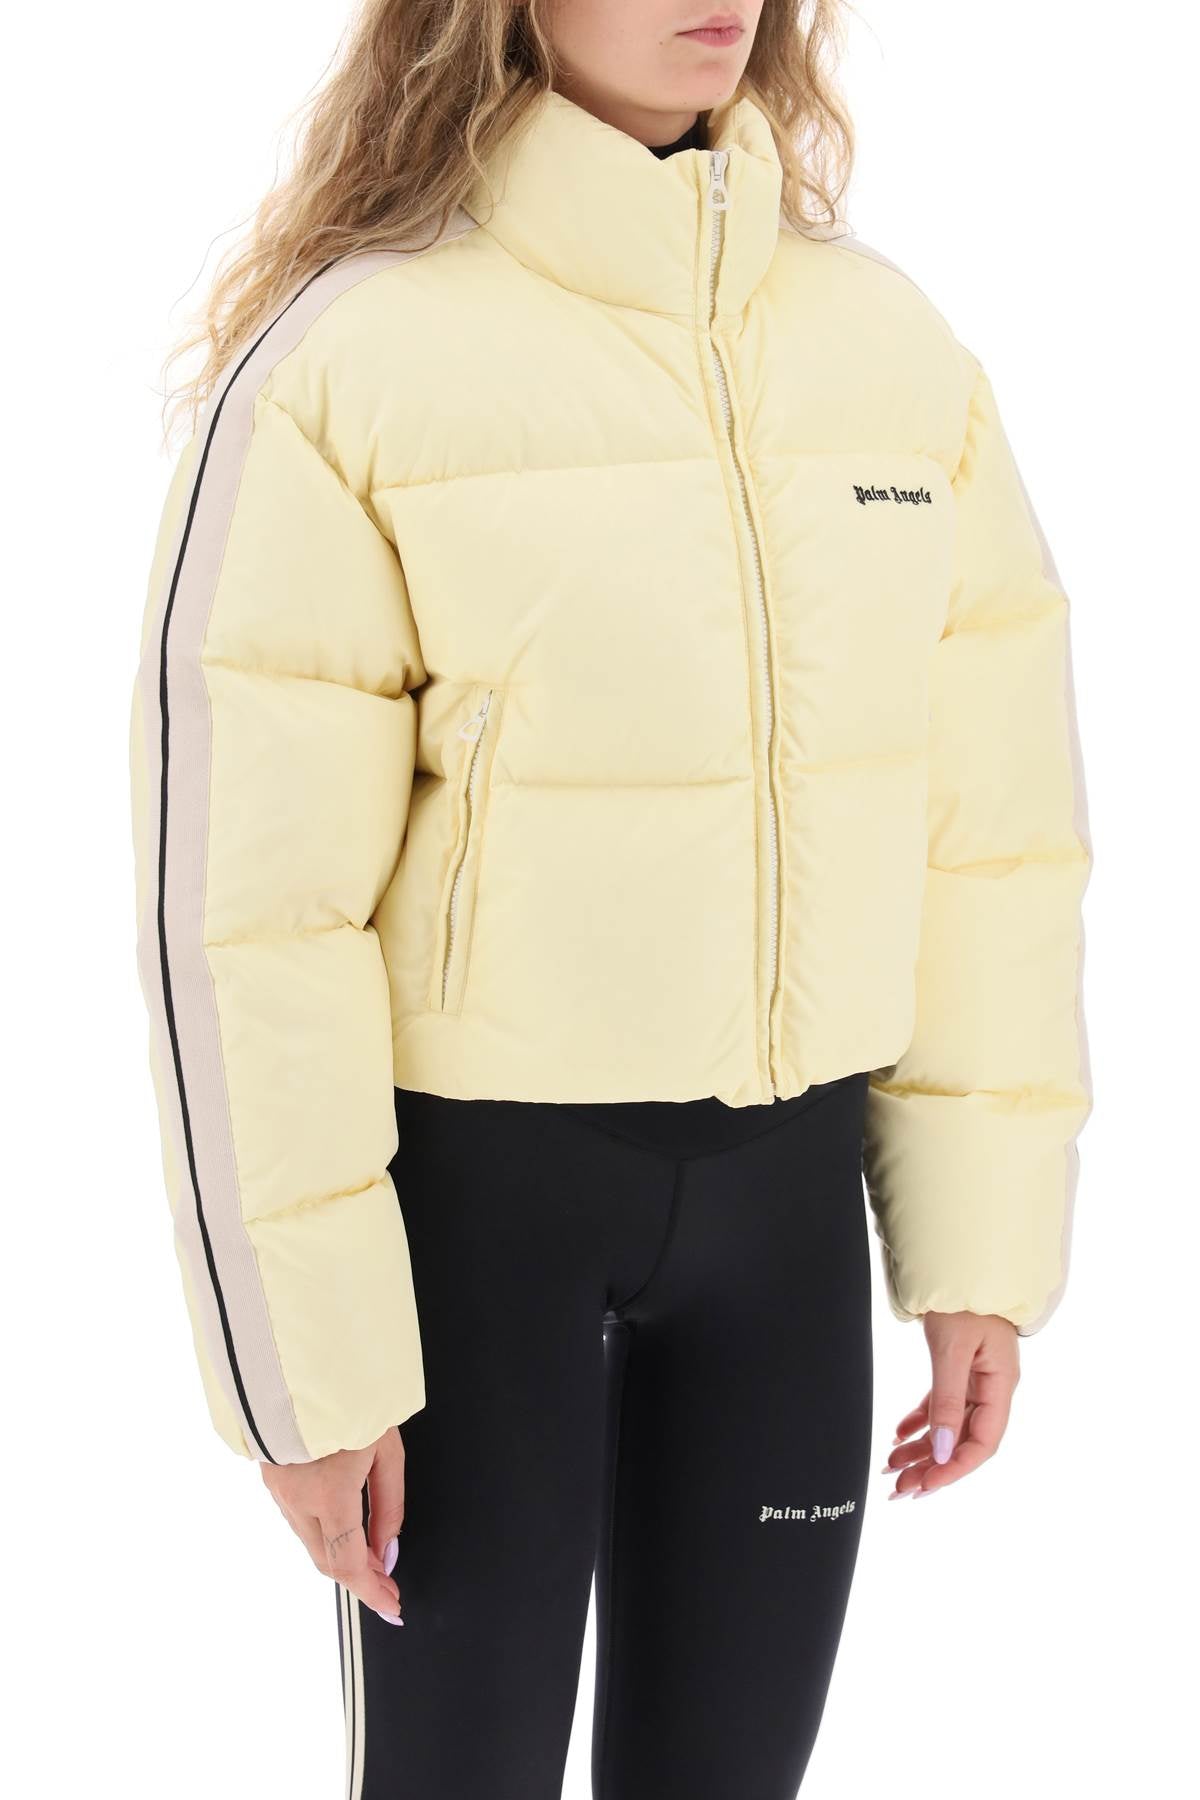 Palm angels cropped puffer jacket with bands on sleeves-1